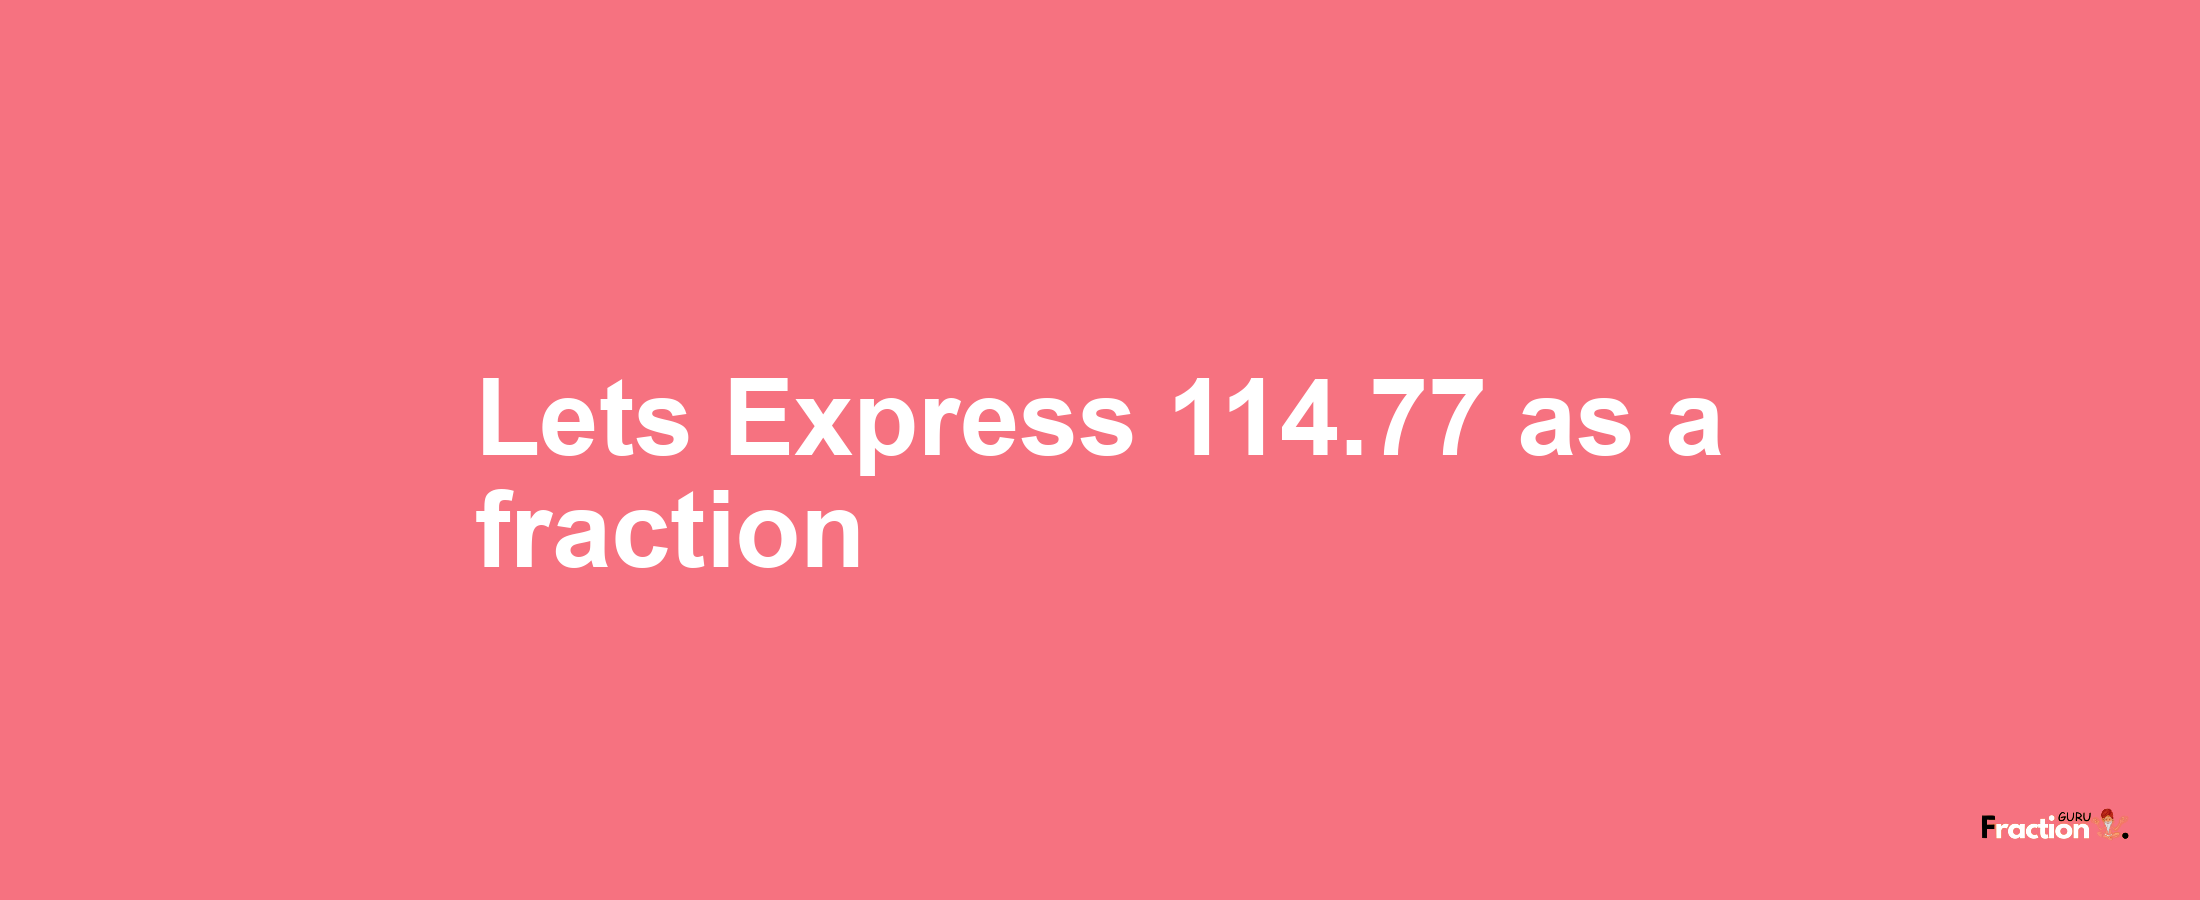 Lets Express 114.77 as afraction